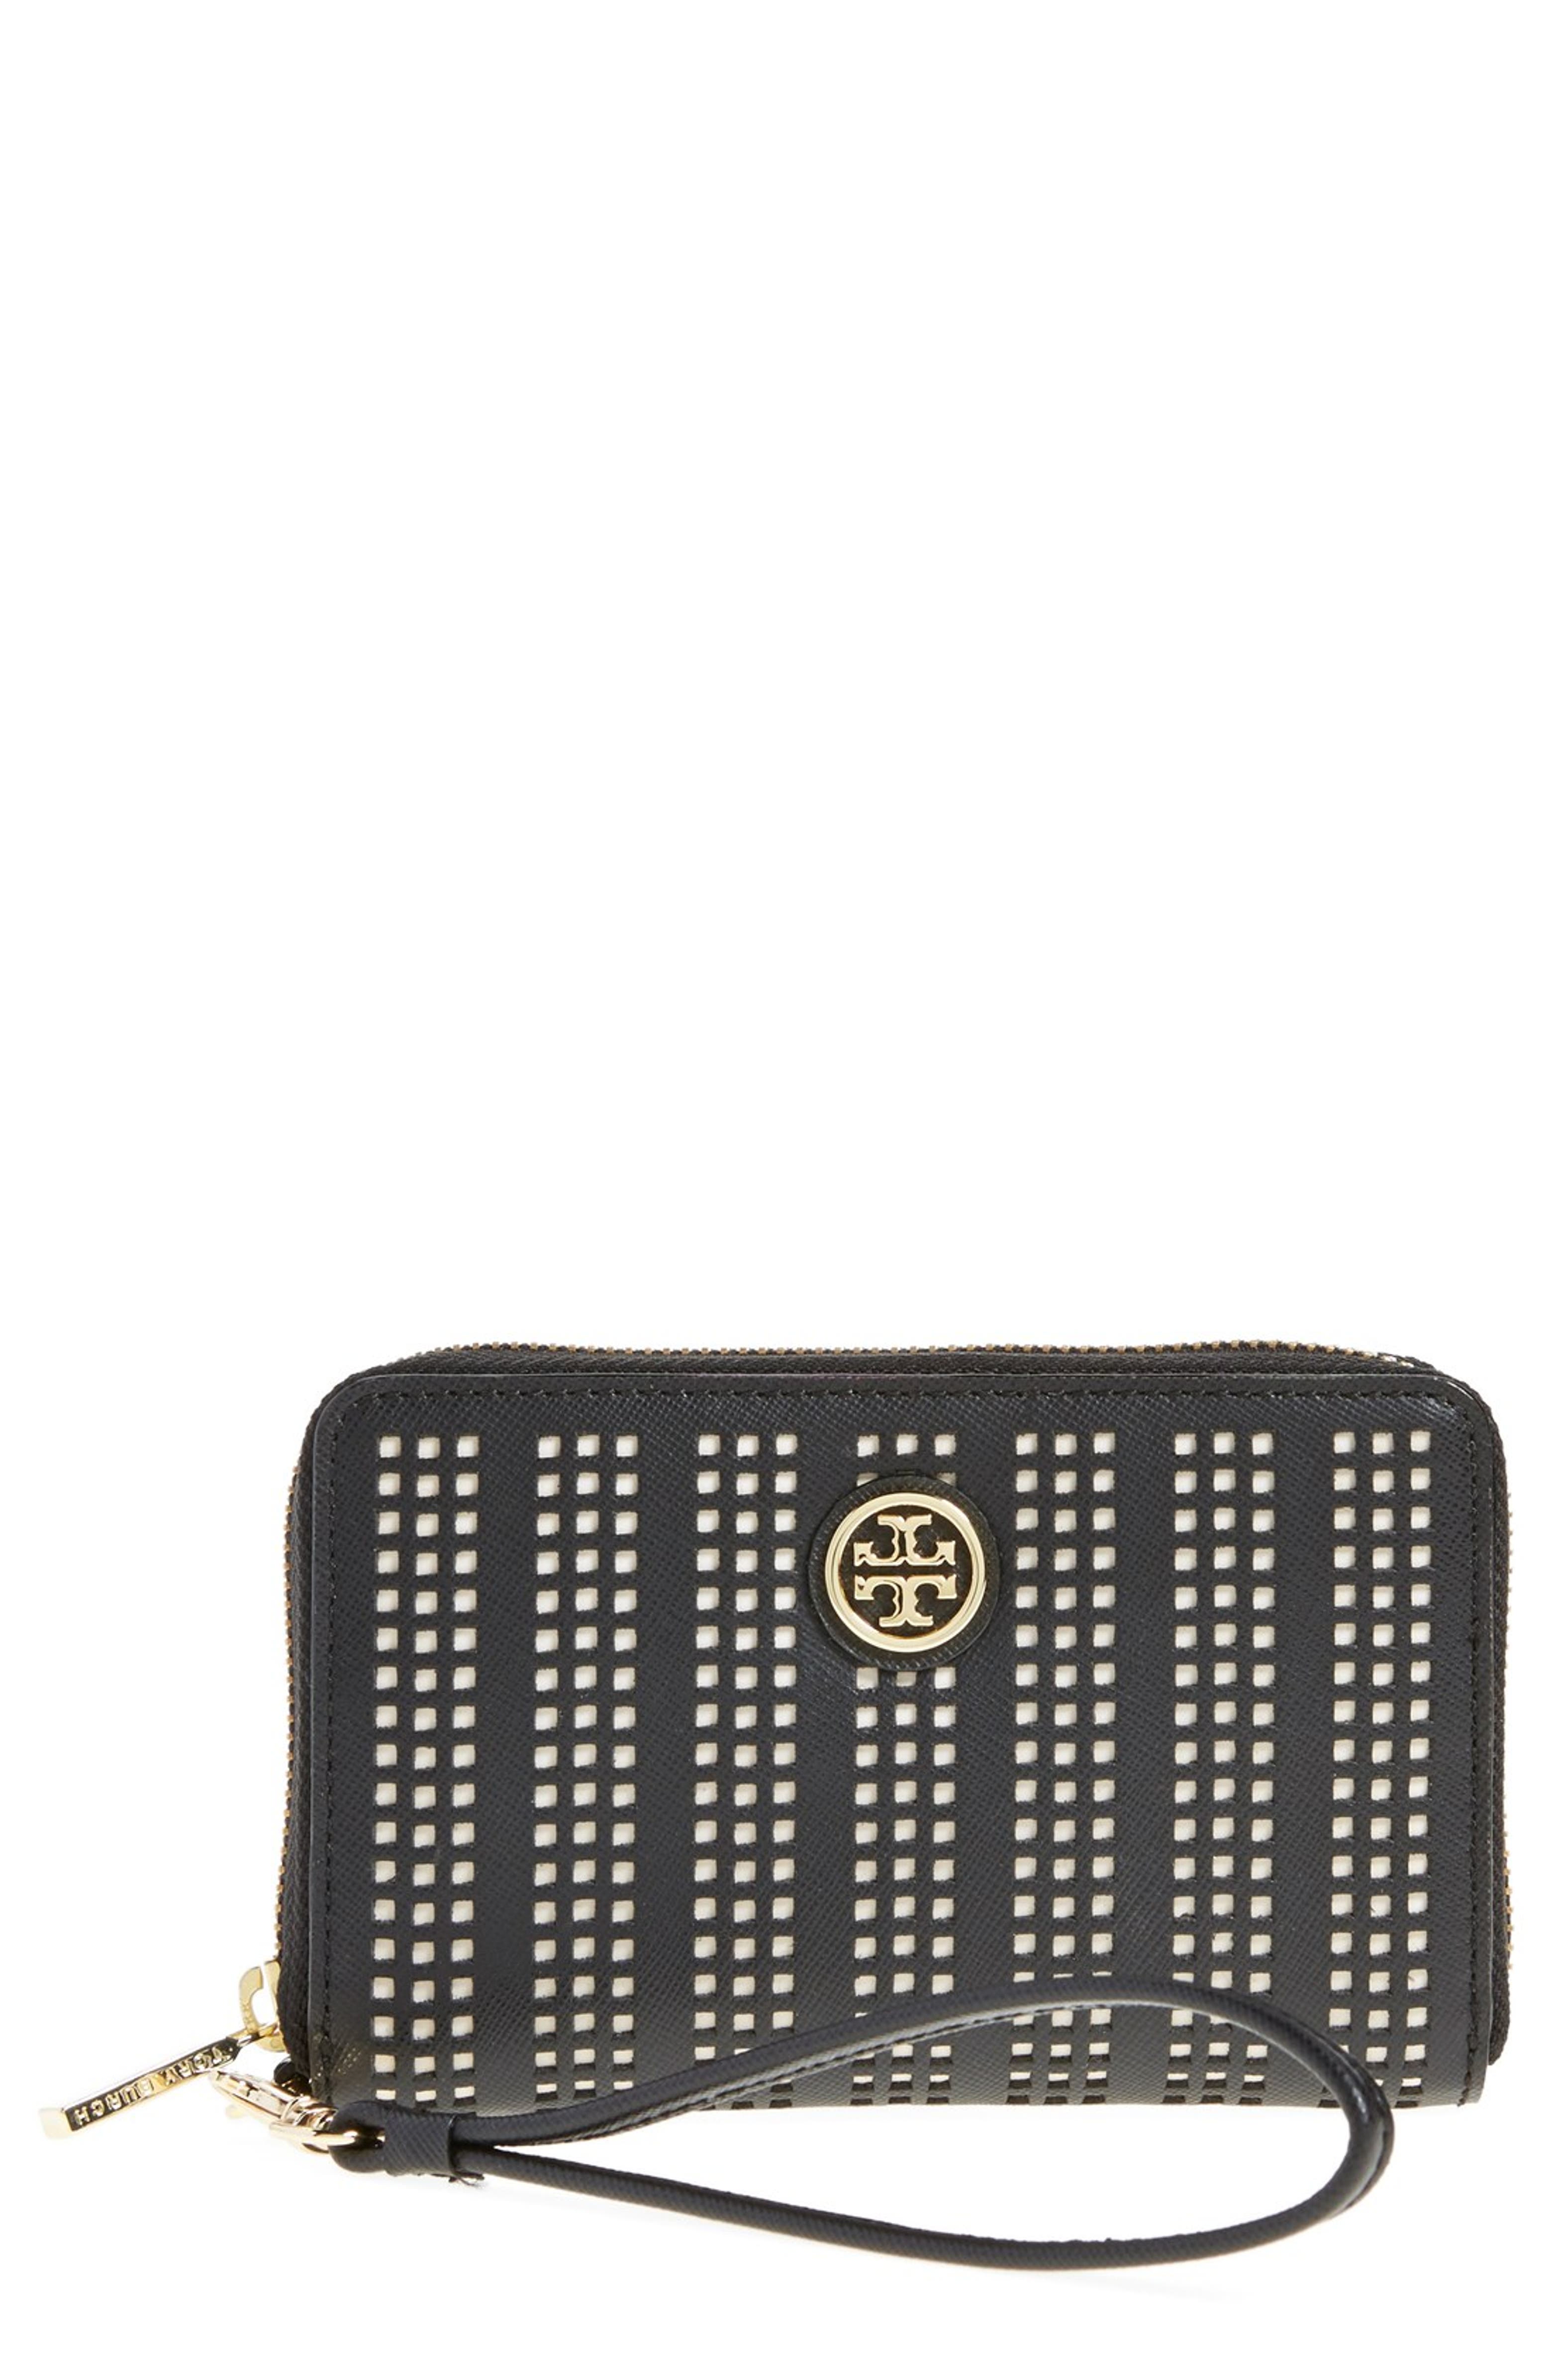 Tory Burch 'Robinson' Perforated Smartphone Wristlet | Nordstrom